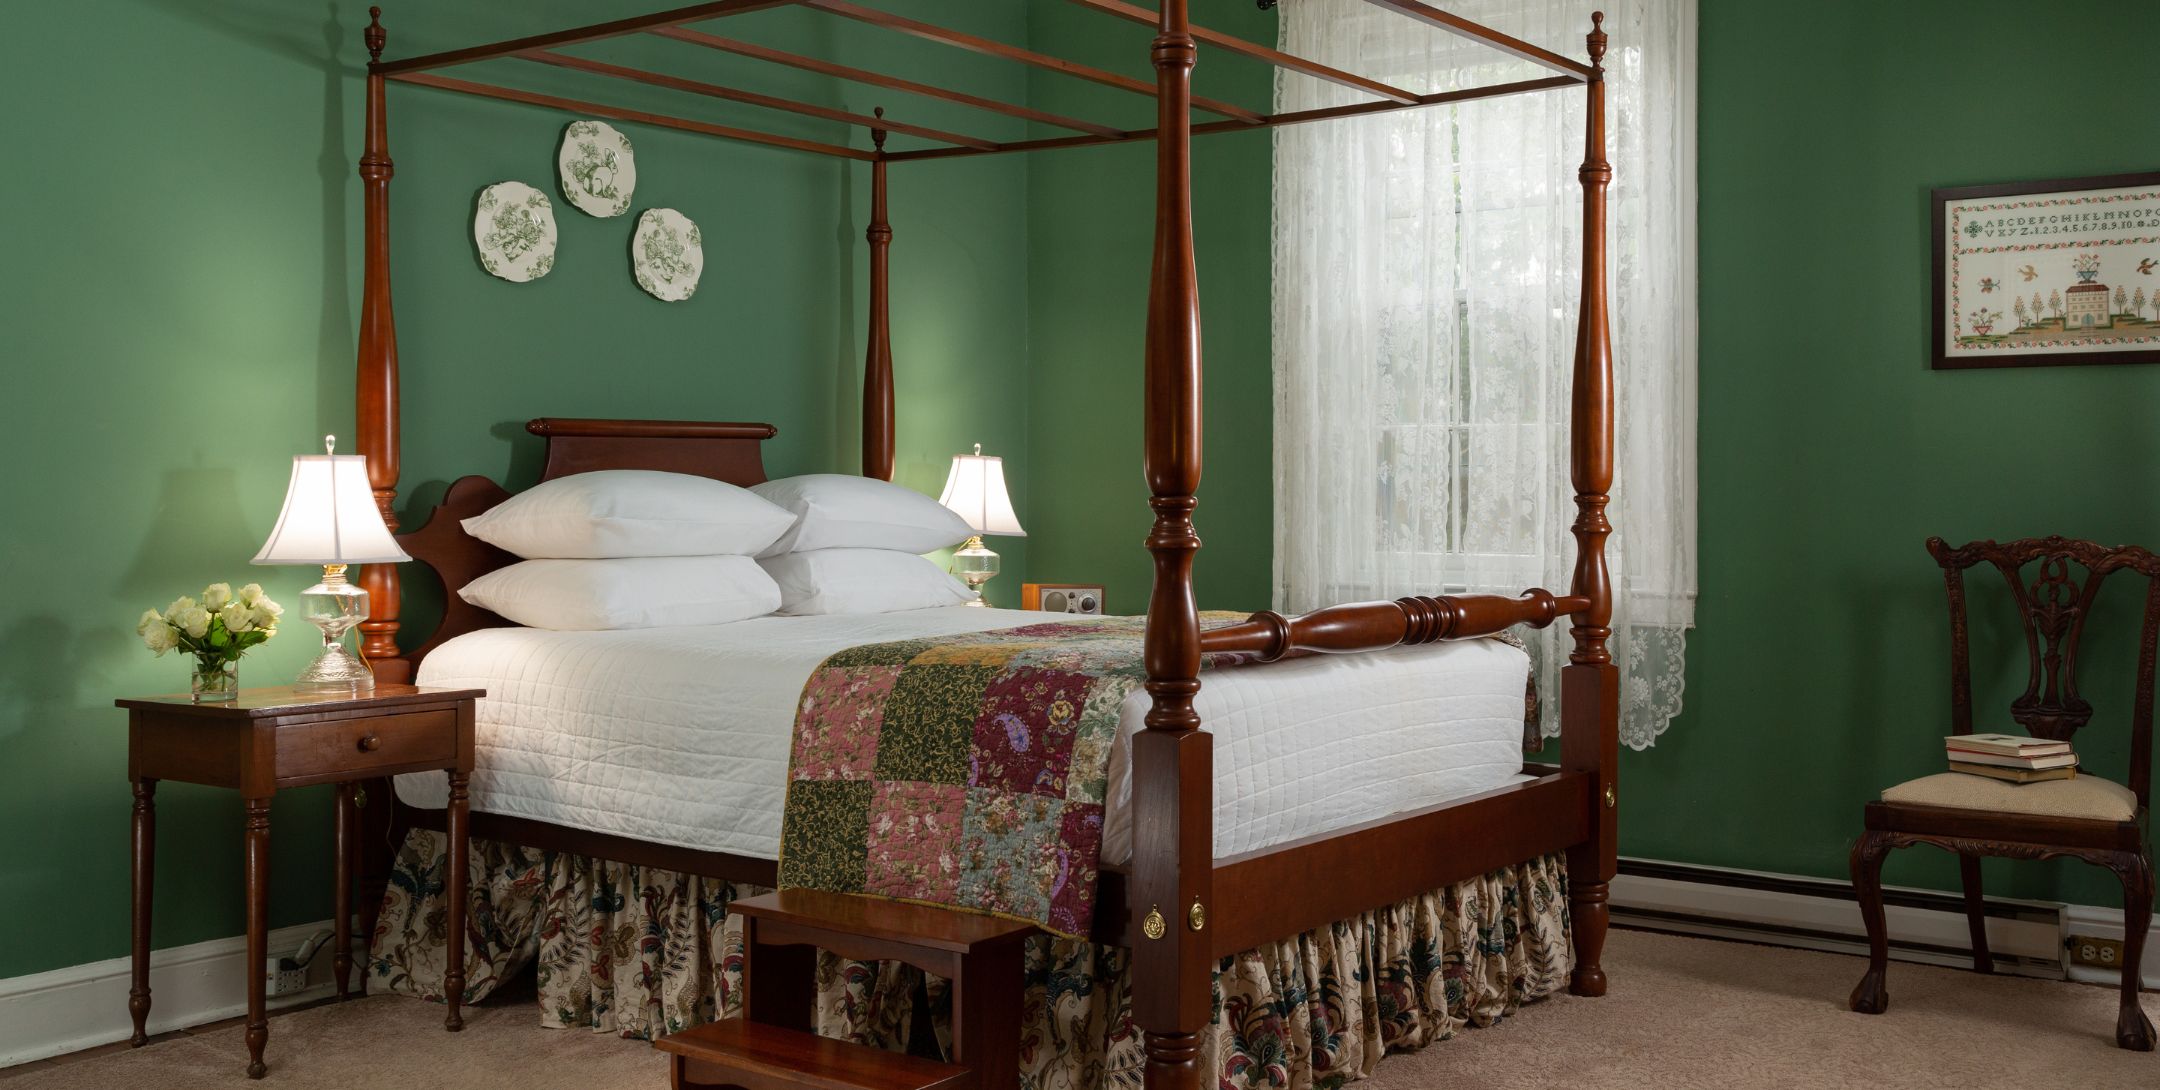 Green Room with green walls, lace curtains, four poster bed and carpeted rug